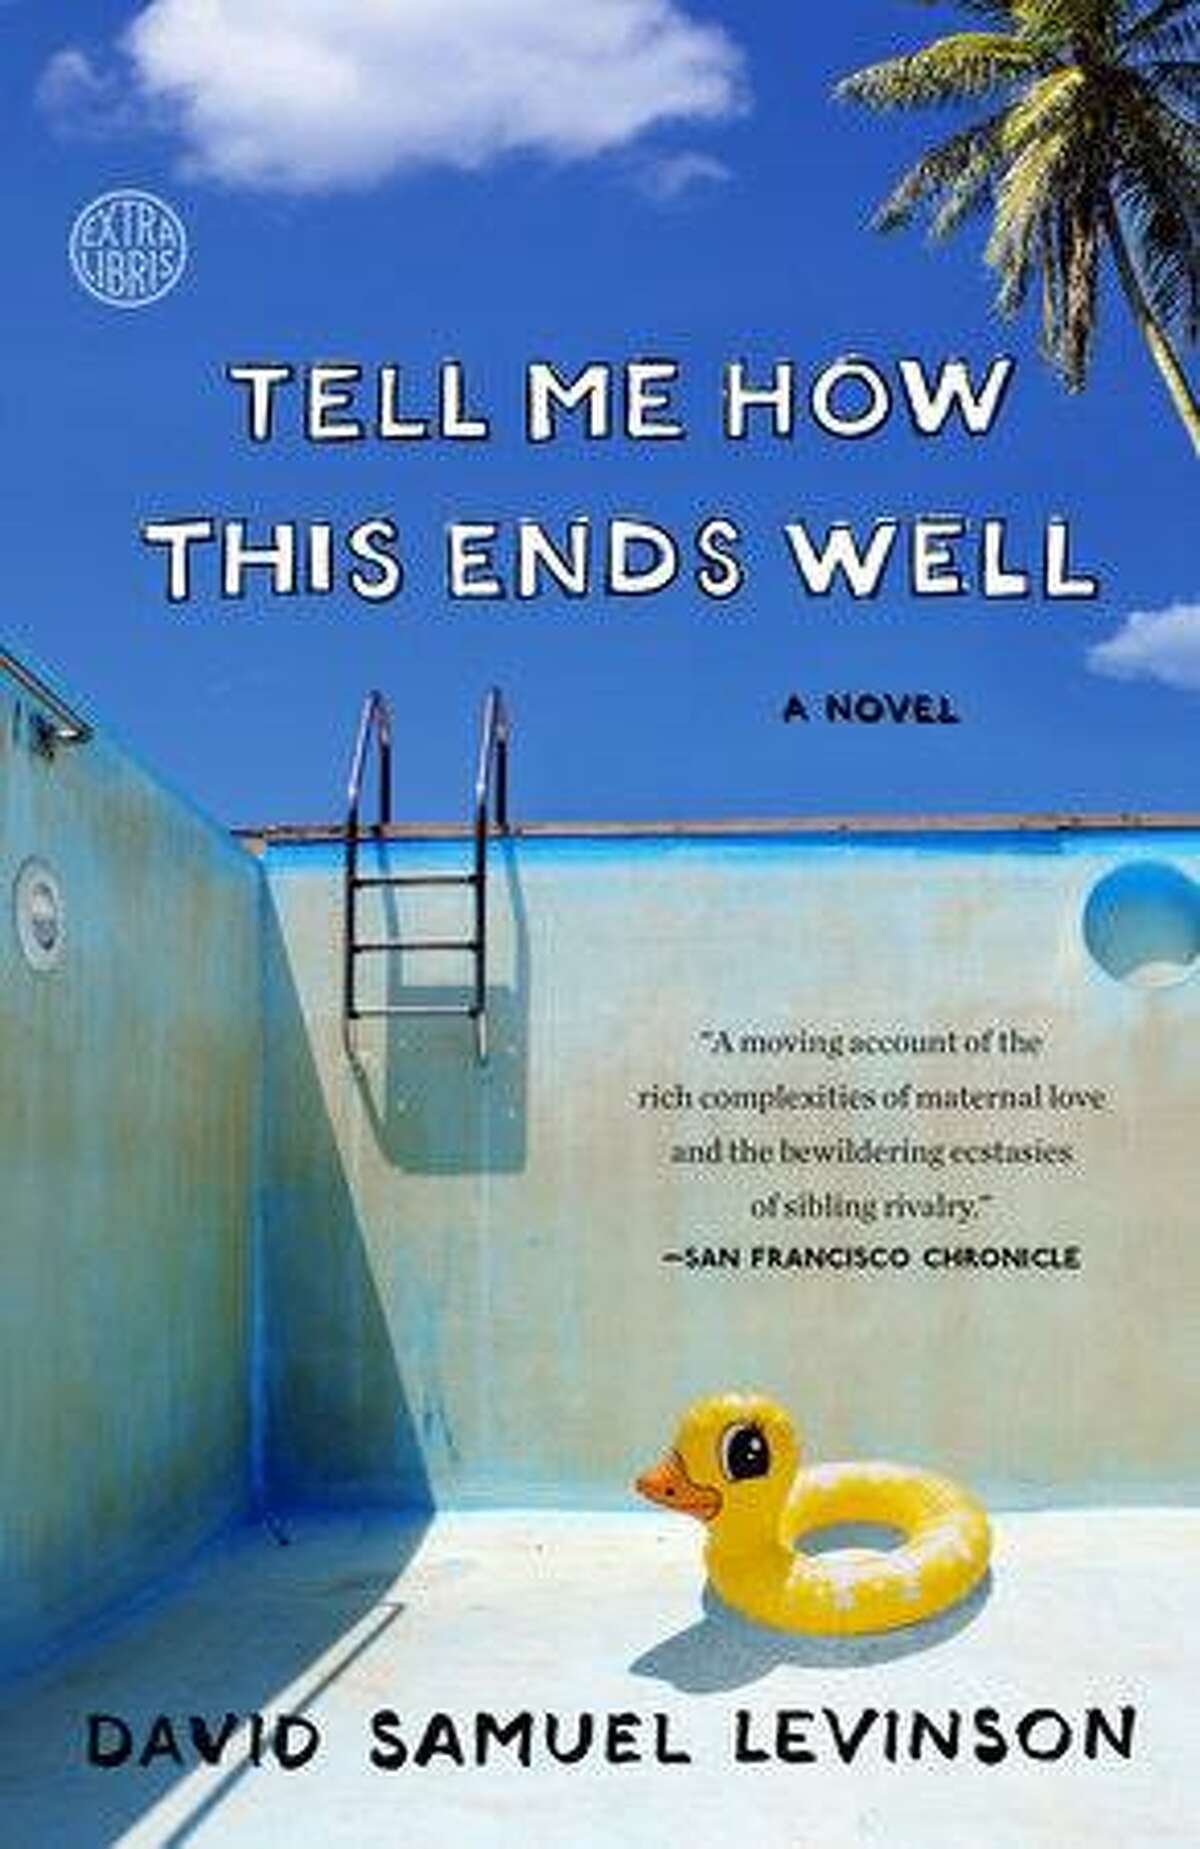 David Samuel Levinson's 2017 novel "Tell Me How This Ends Well" is a black comedy set in a dystopian future.